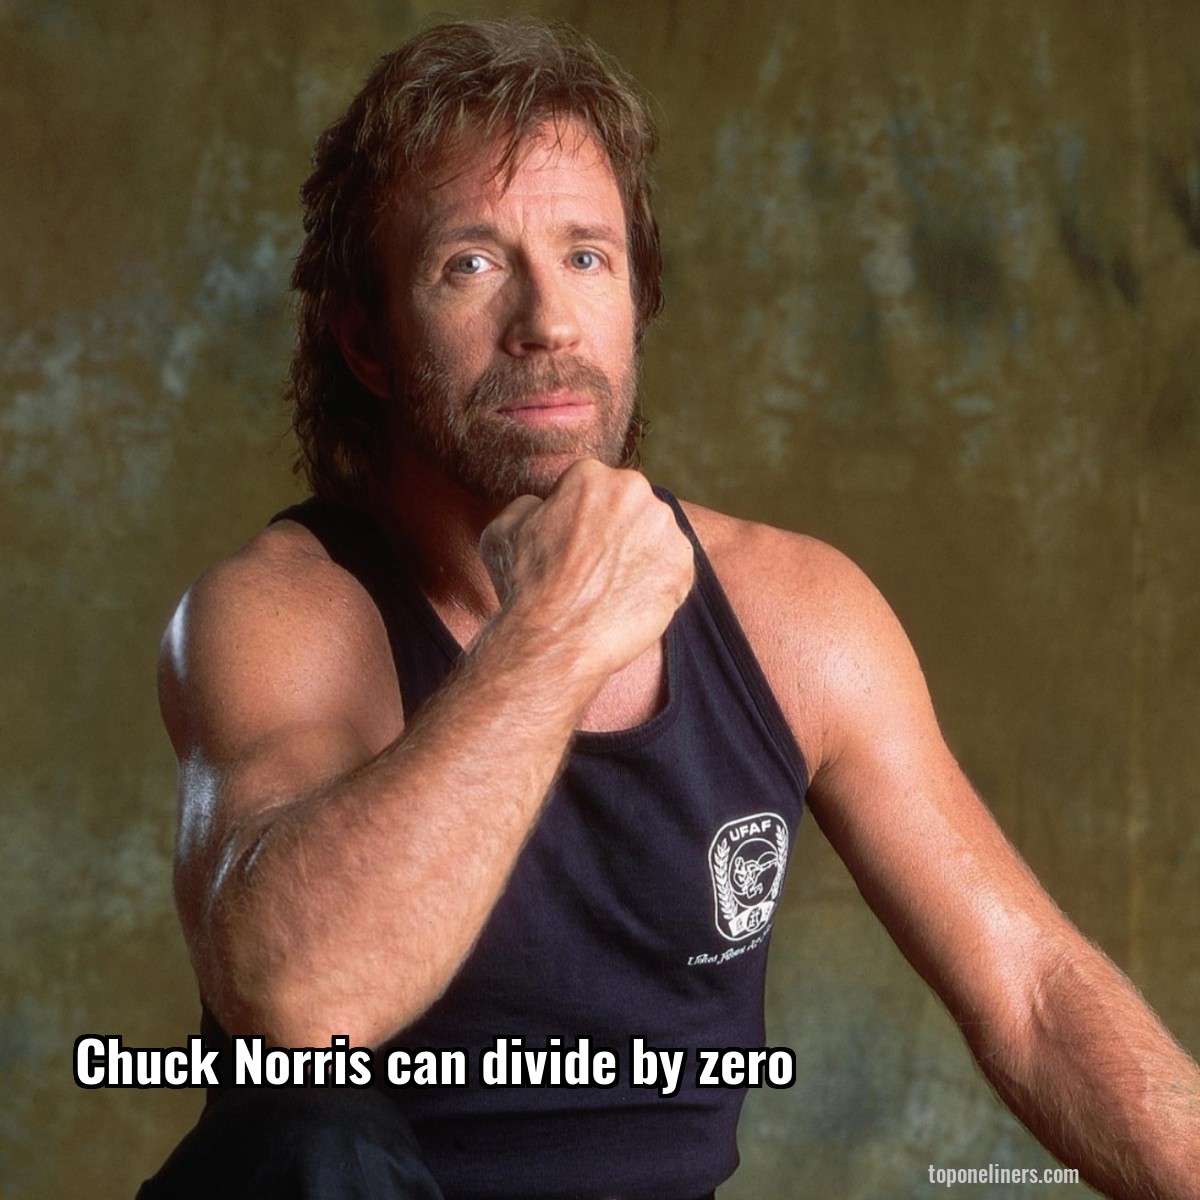 Chuck Norris can divide by zero